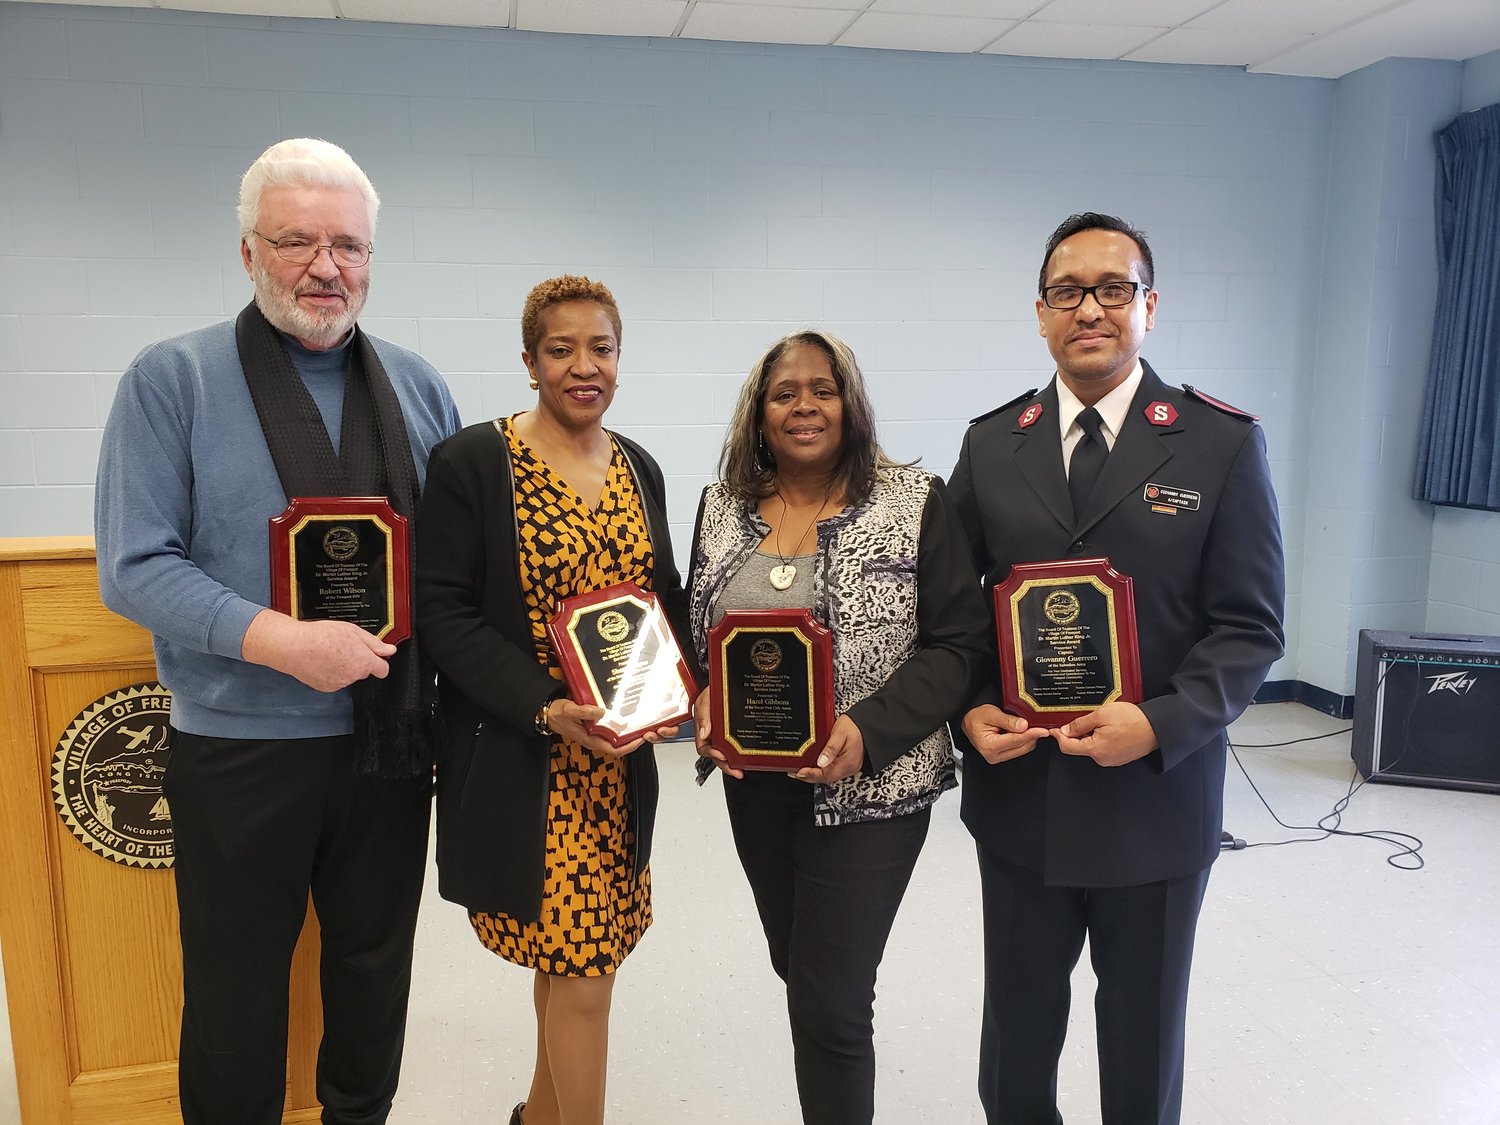 Four community-minded people — Robert Wilson, of the Freeport INN, far left; Sharon Payne and Hazel Gibbons, of the Stearns Park Civic Association; and Capt. Giovanny Guerrero, of the Freeport Salvation Army — were recognized for their contributions at the village’s Martin Luther King Jr. celebration at the Freeport Recreation Center on Jan. 19.